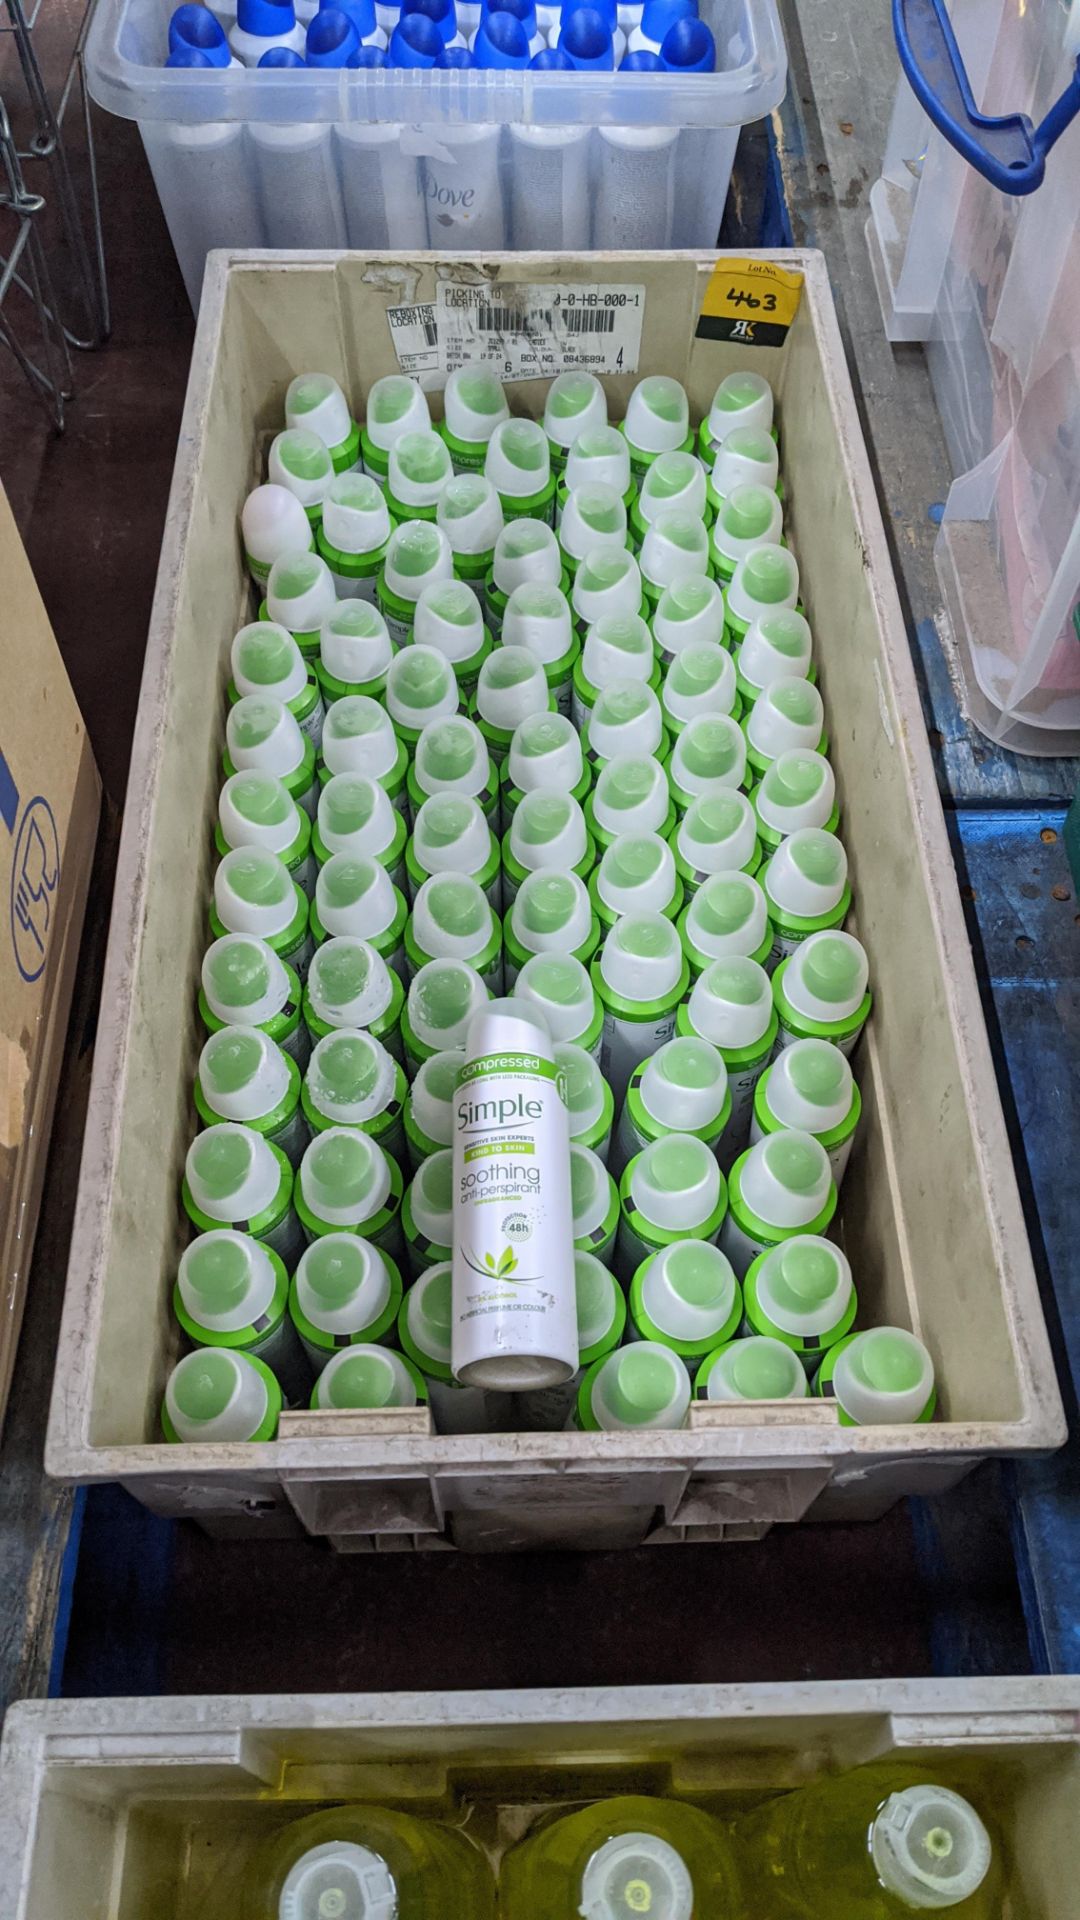 79 off 125ml cans of Simple Soothing Antiperspirant. IMPORTANT – DO NOT BID BEFORE READING THE